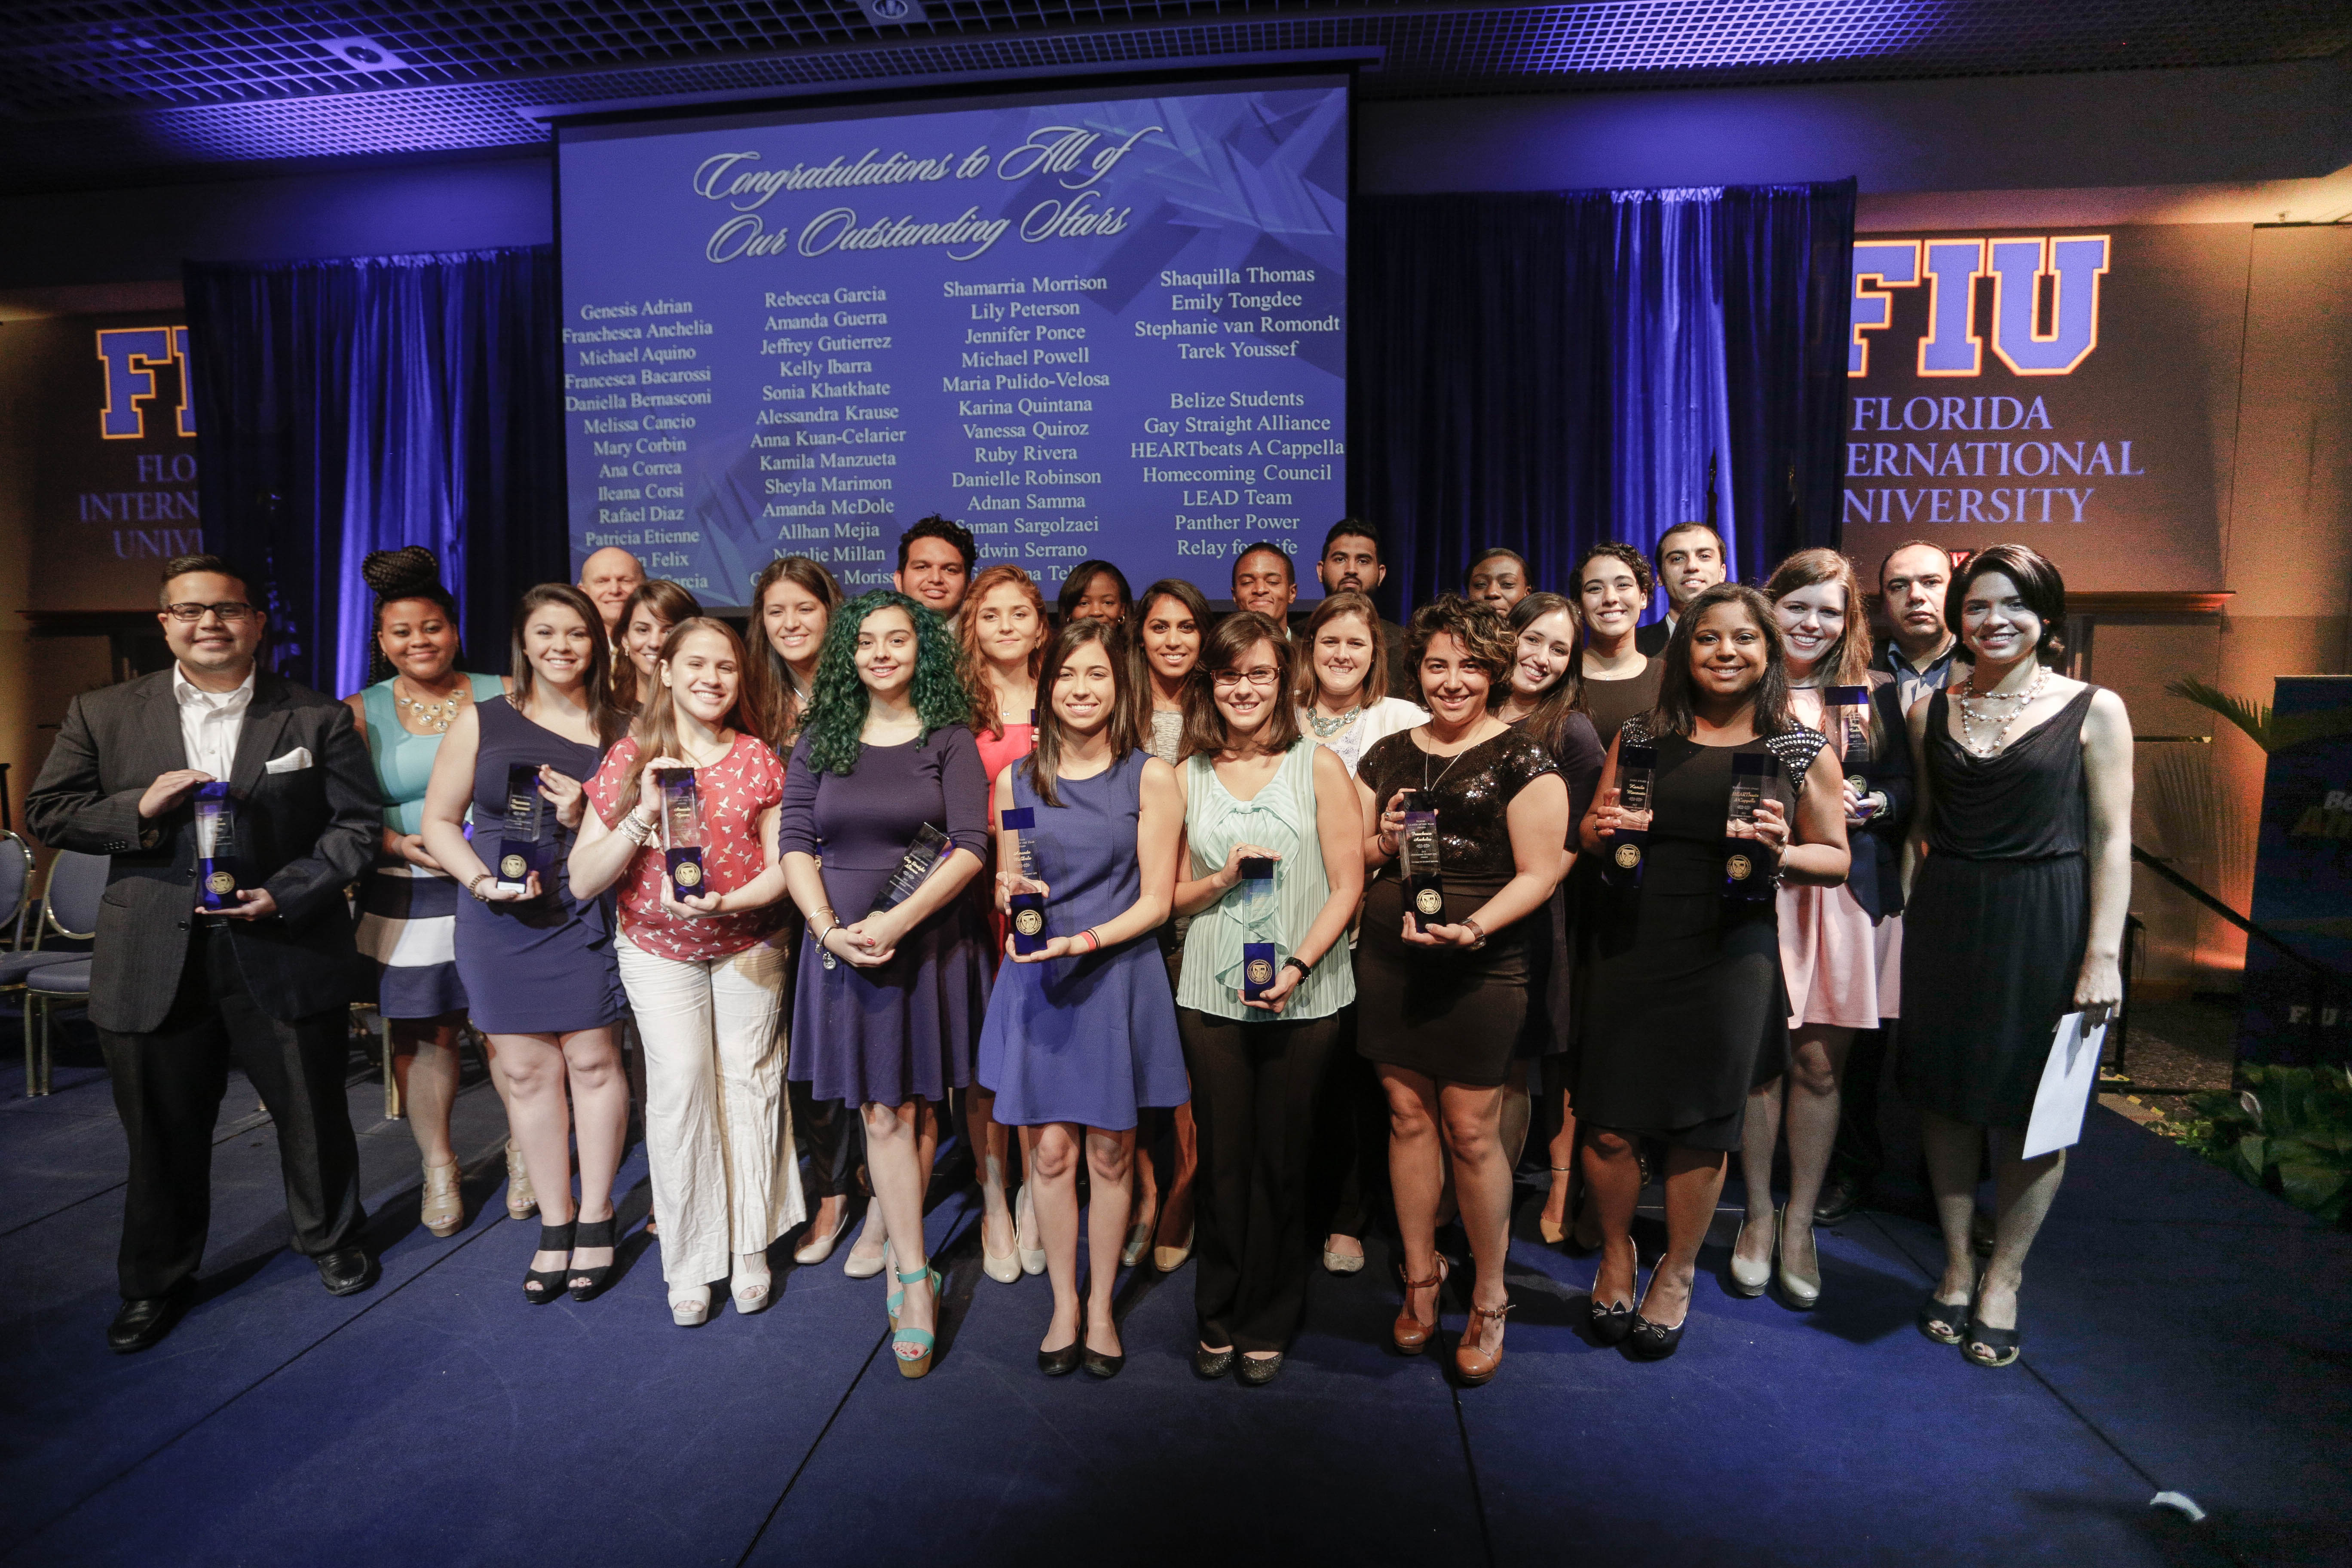 The 2015 Student Life Awards winners included three student organizations and 21 student winners.